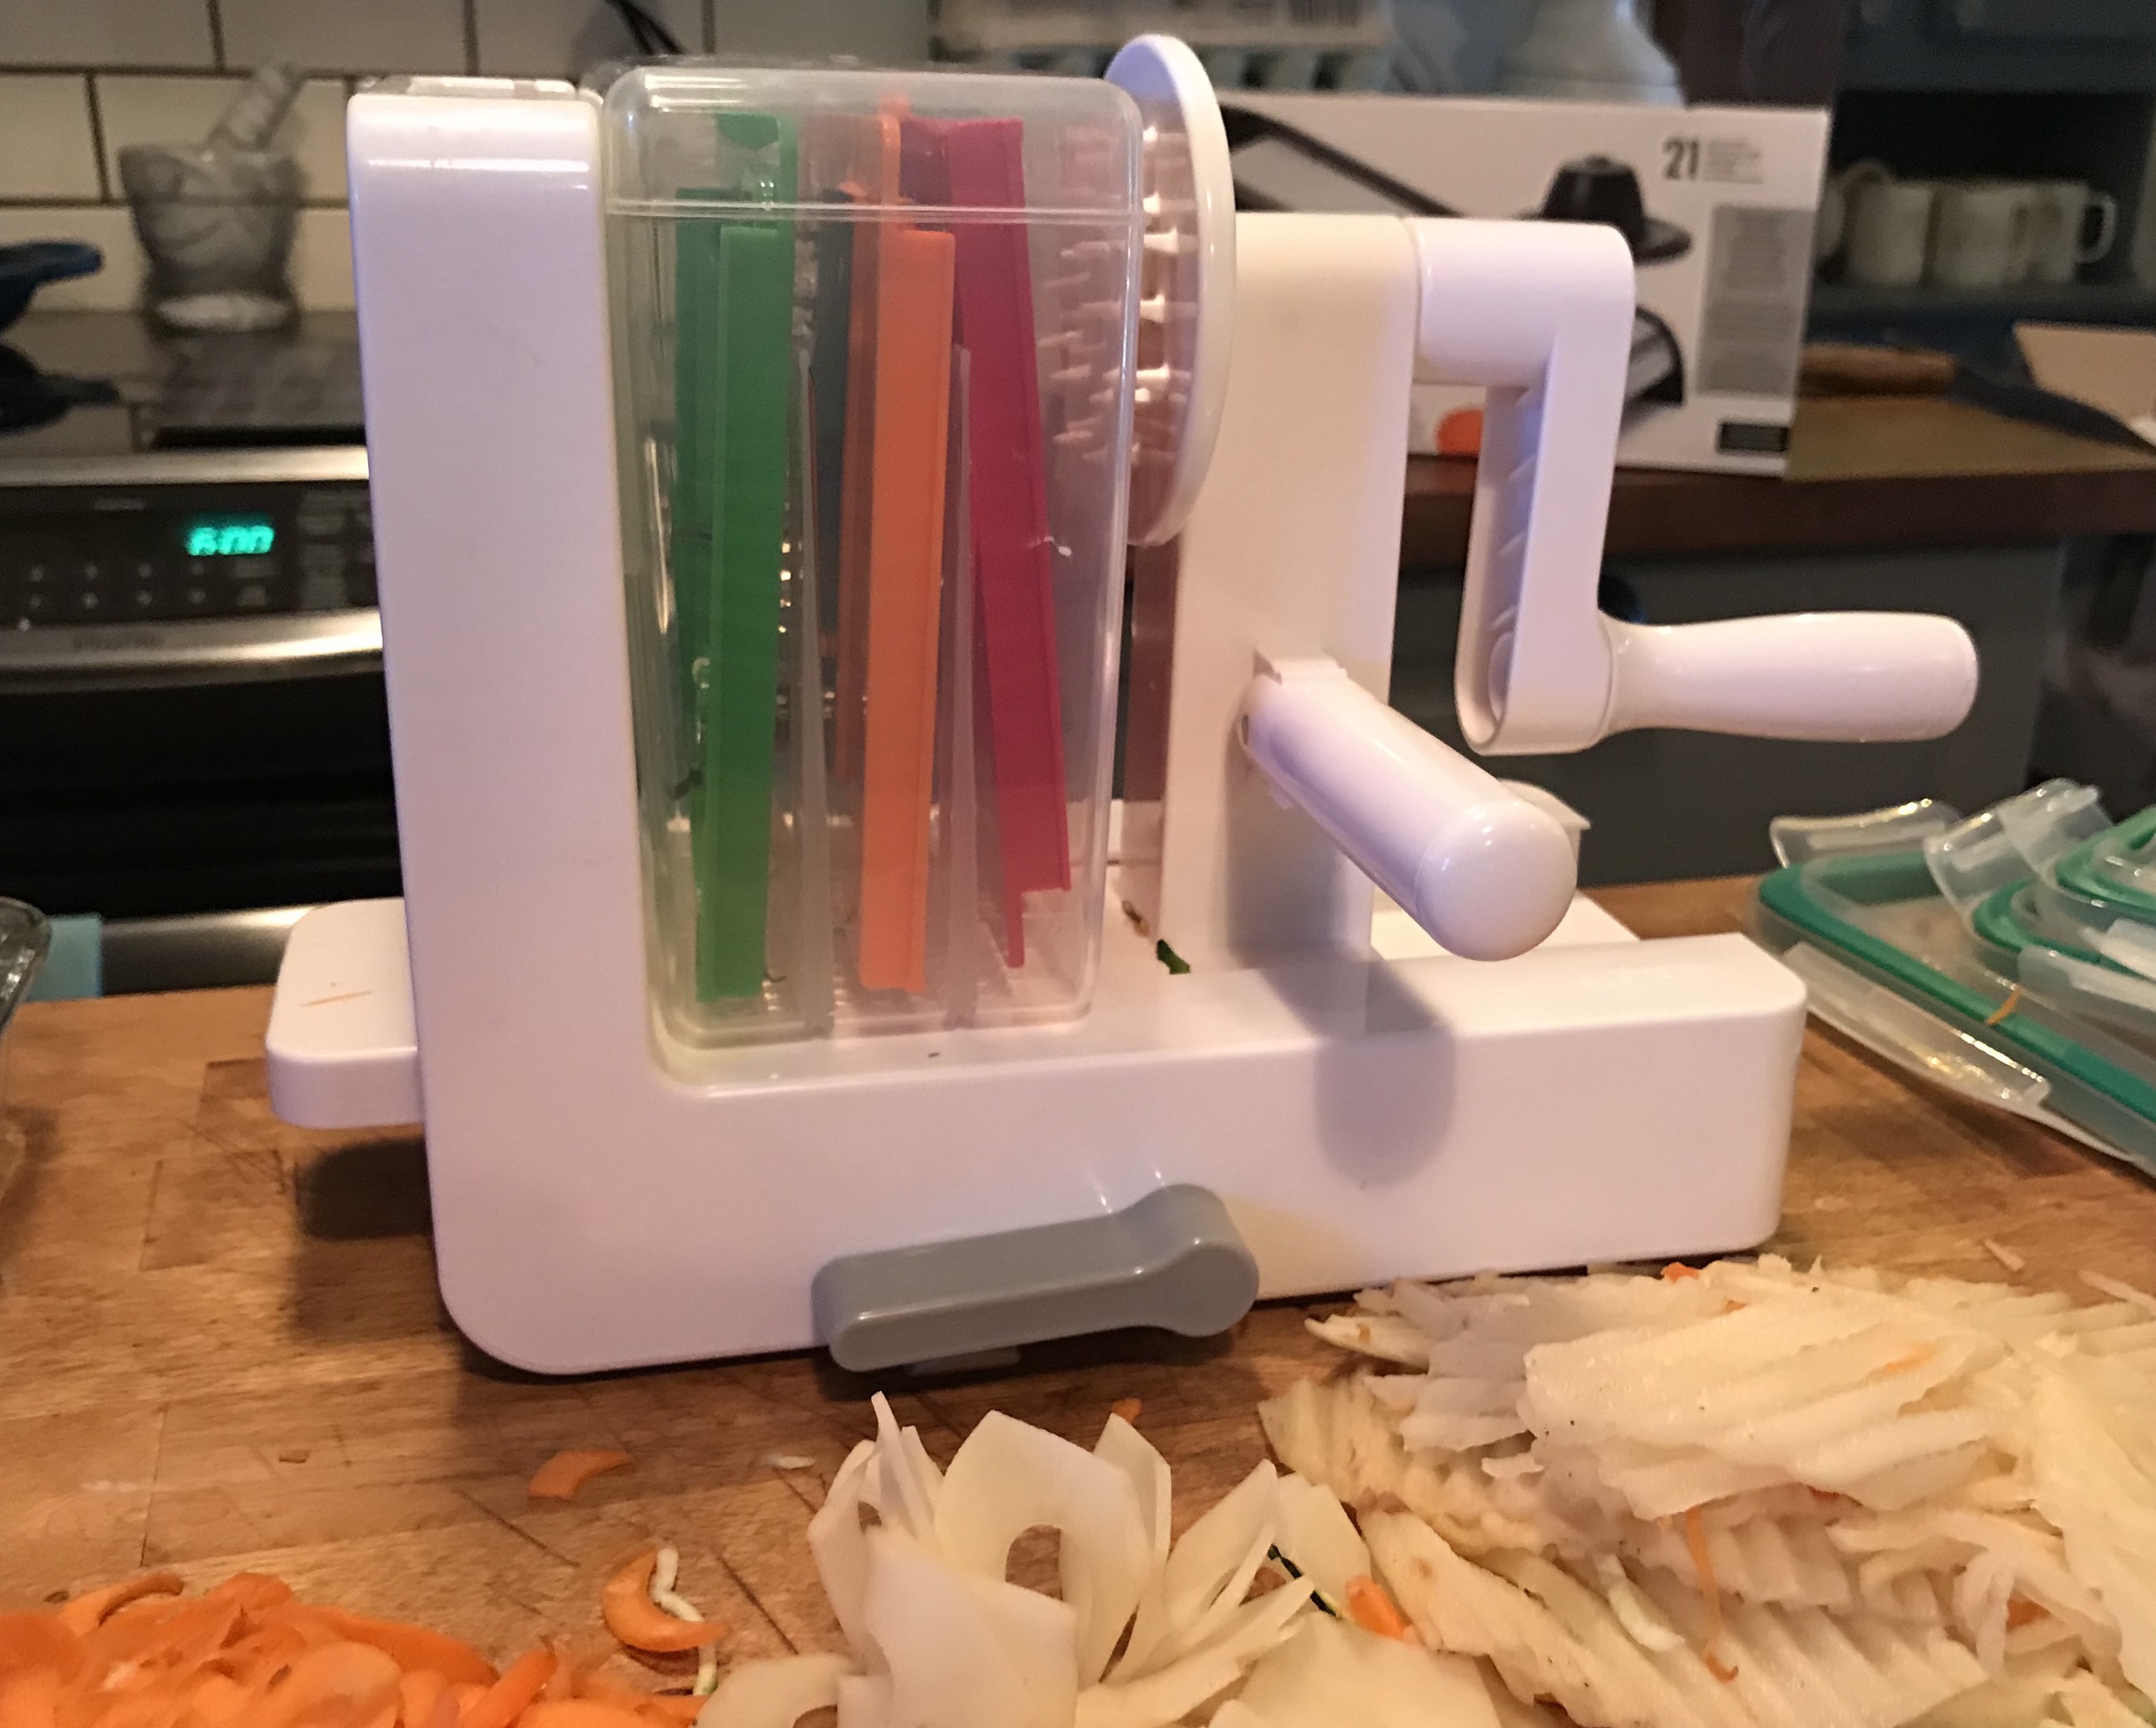 OXO Spiralizer container for blades